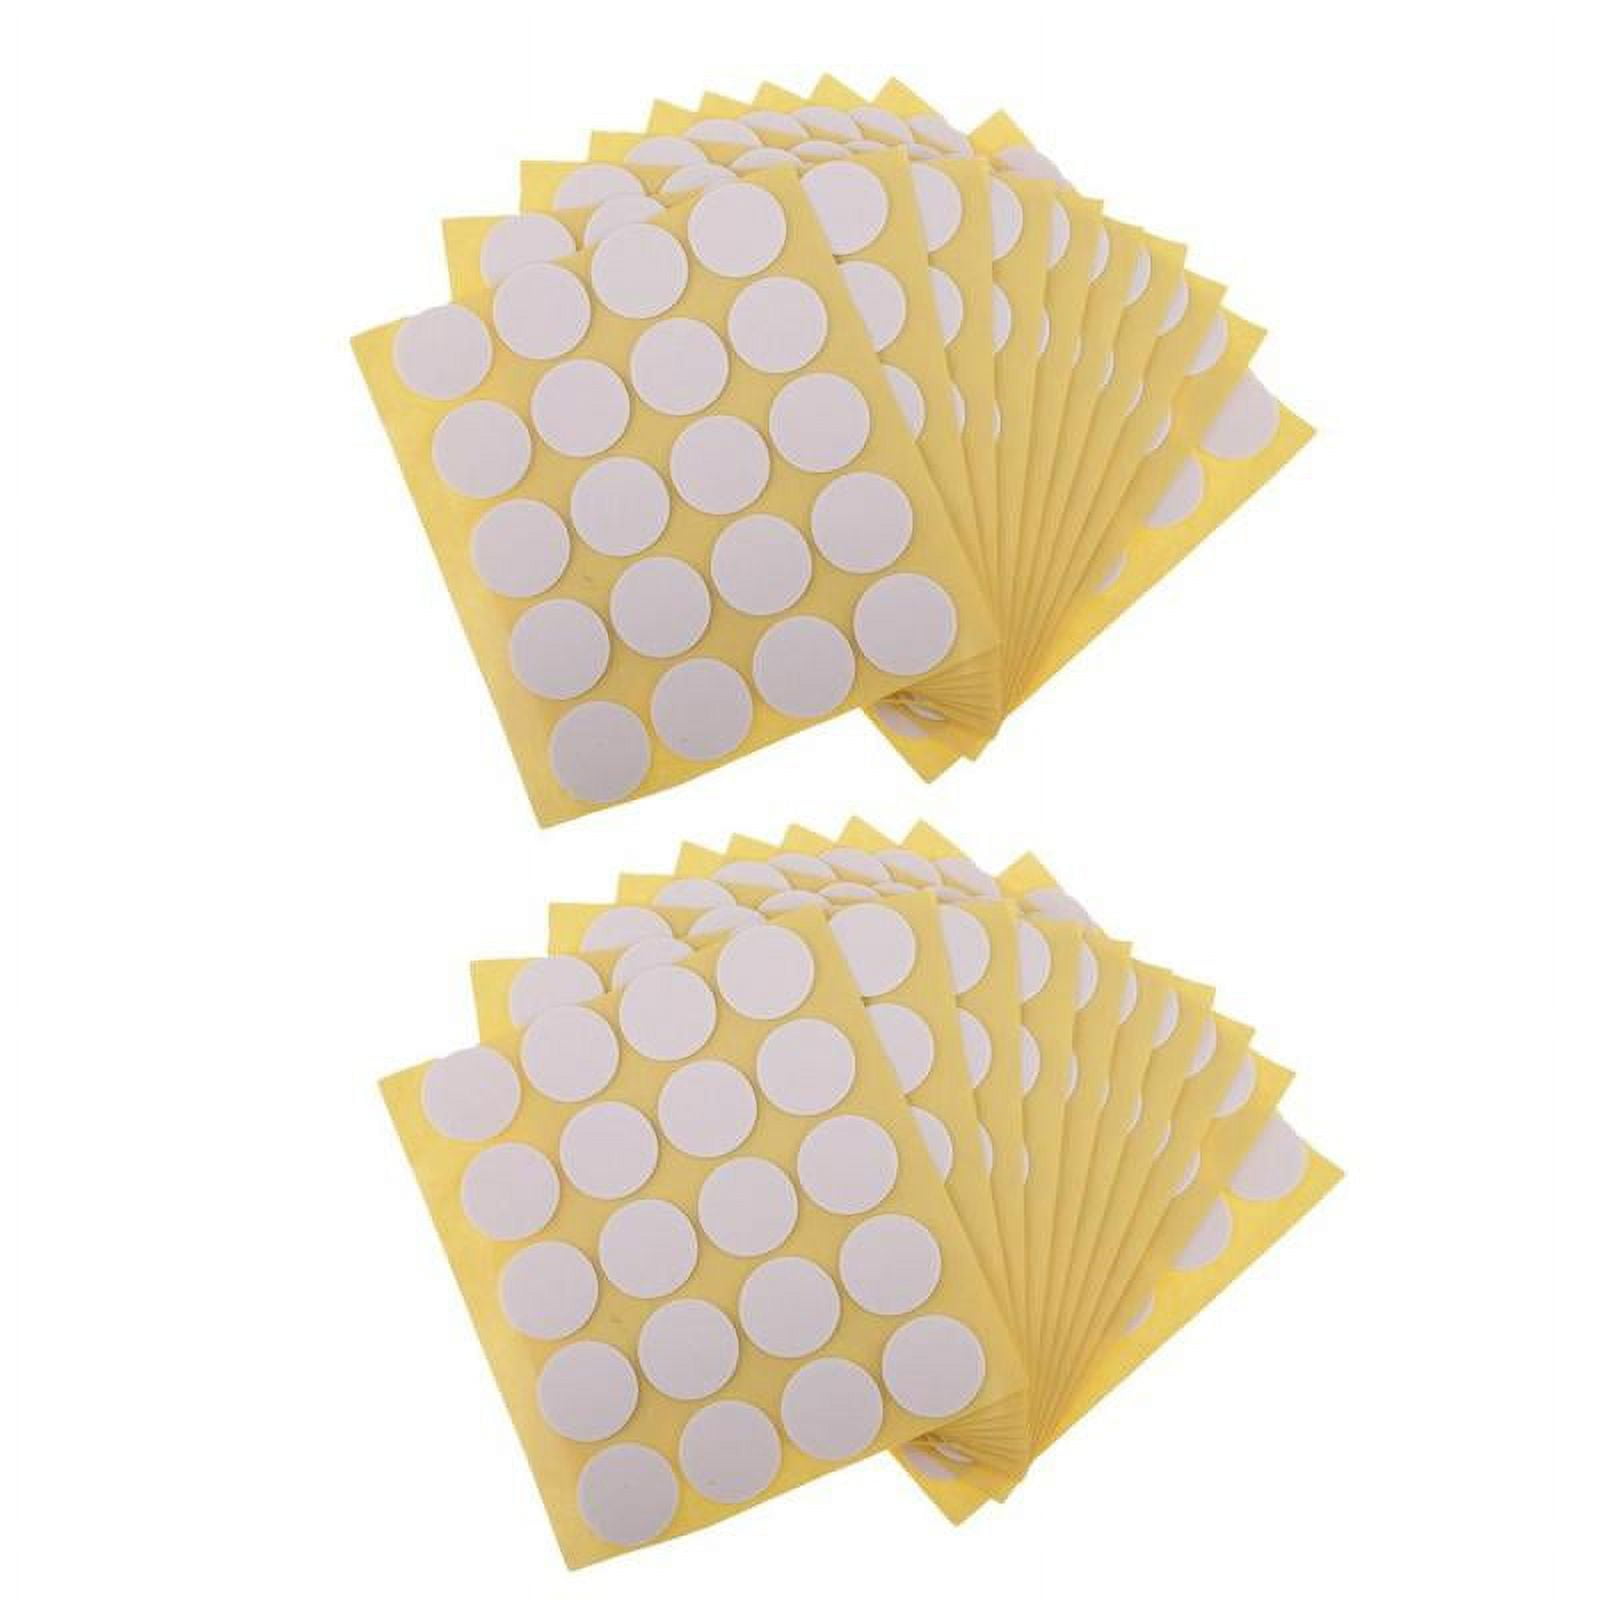 PVC Candle Wick Stickers - 100pcs - Refined Naturals